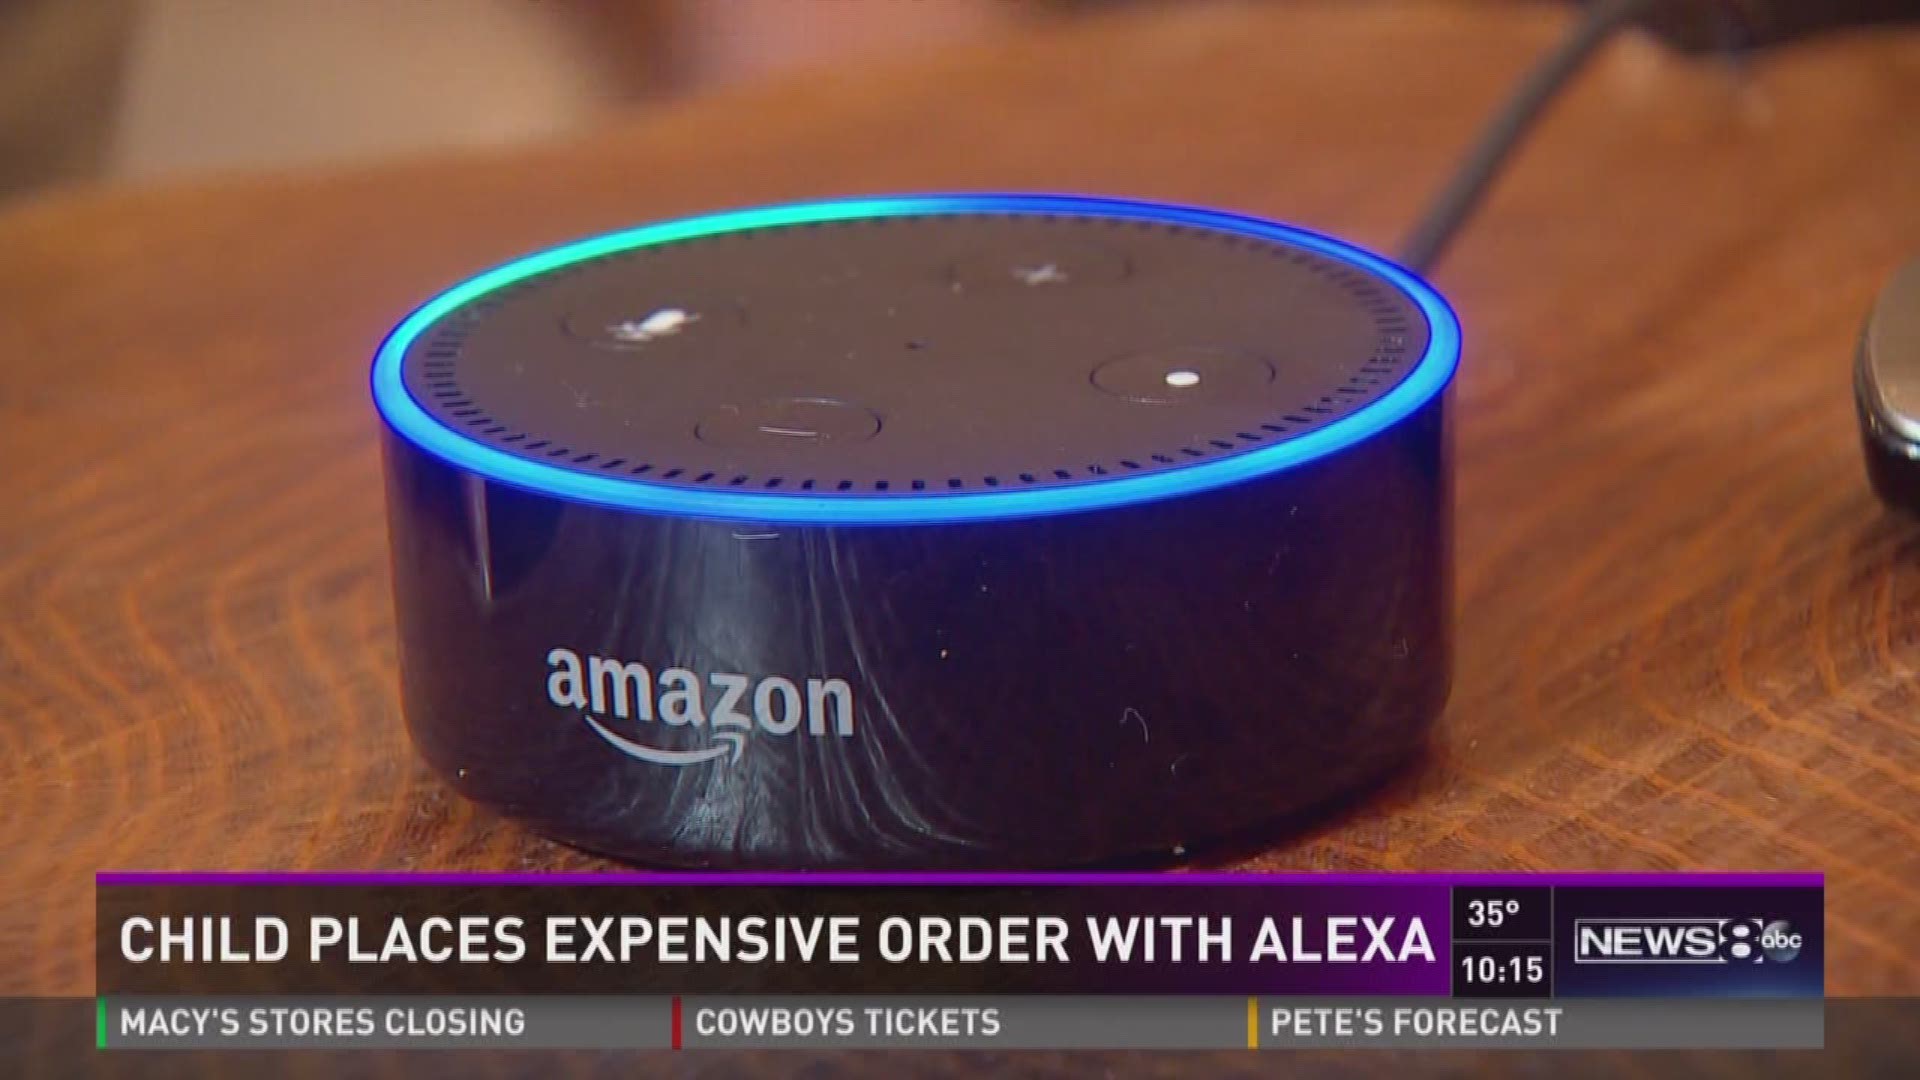 Child places expensive order with Alexa